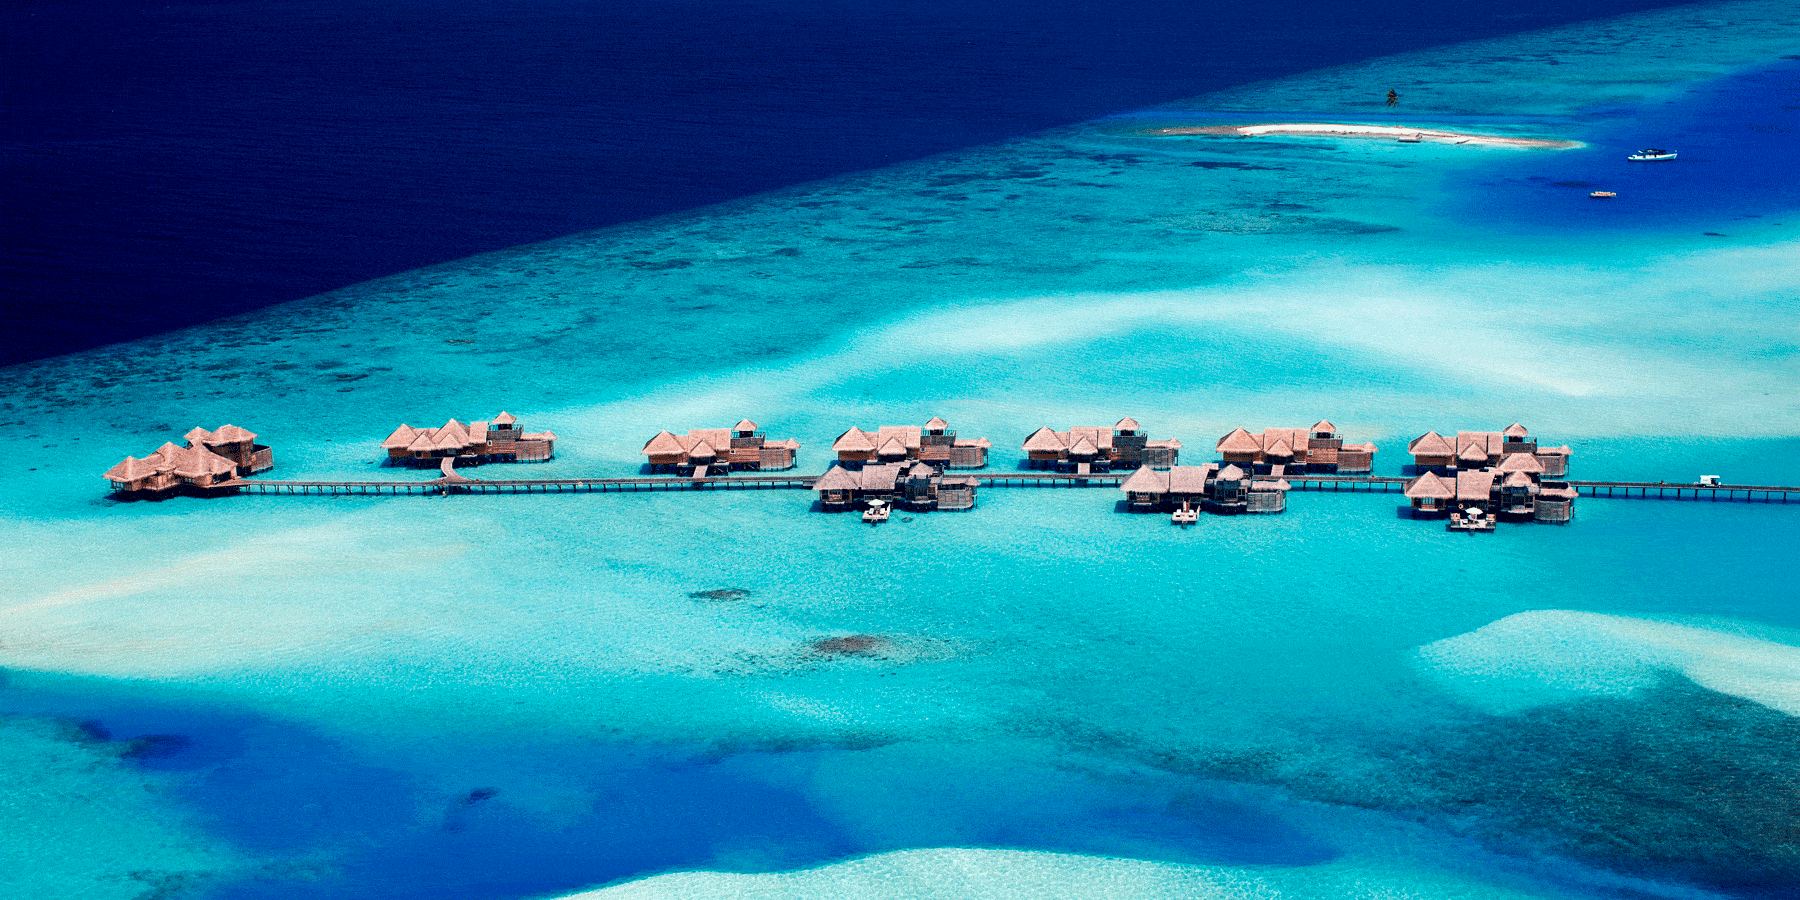 Ariel photo of Gililankanfushi in the Maldives with overwater villas